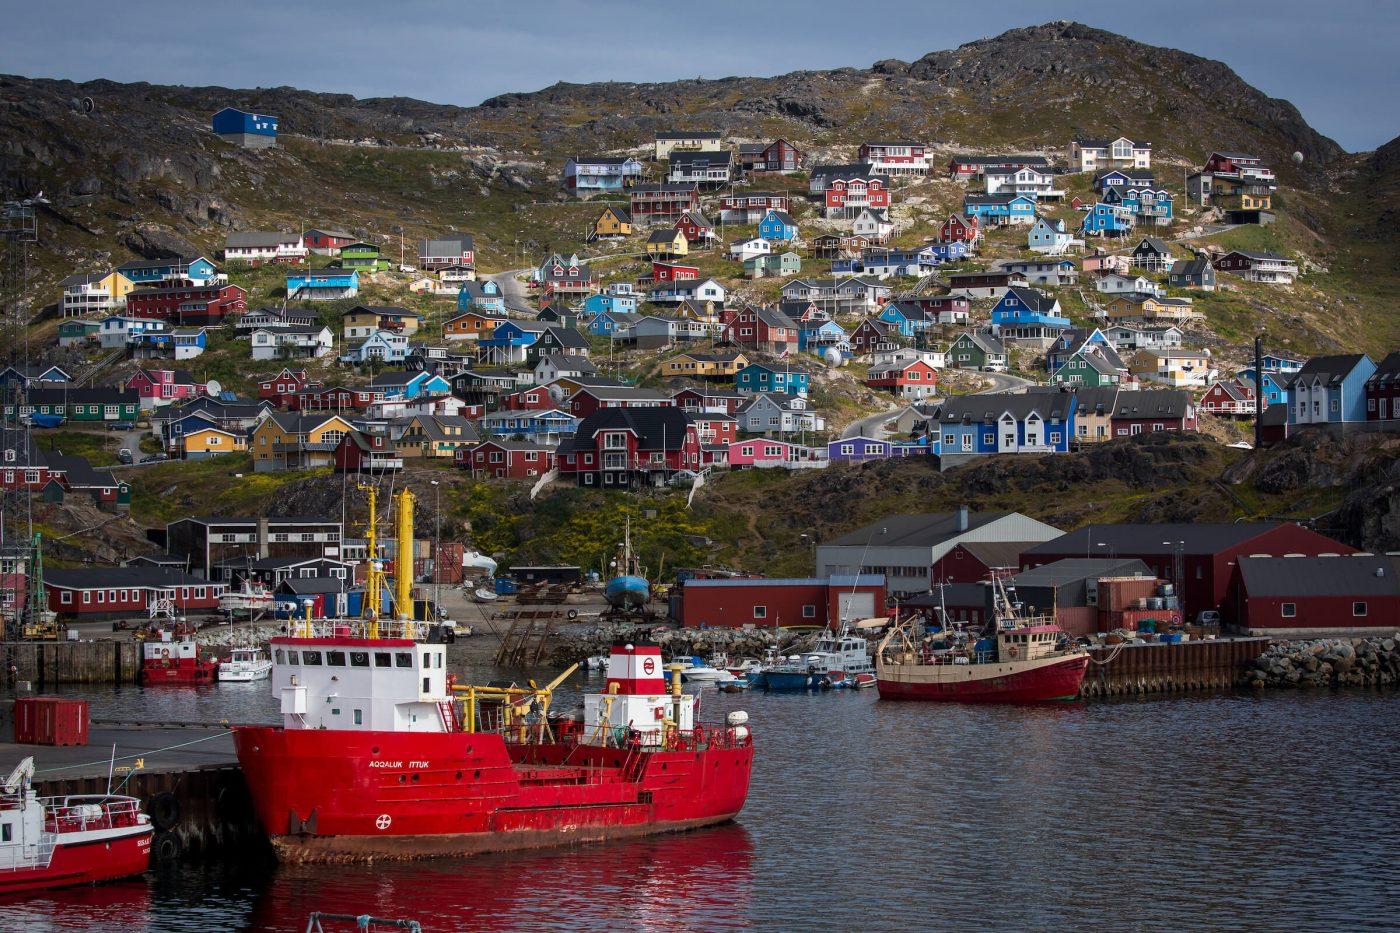 Qaqortoq is South Greenlands largest town and is built around a natural harbour shaped like a big amphitheatre